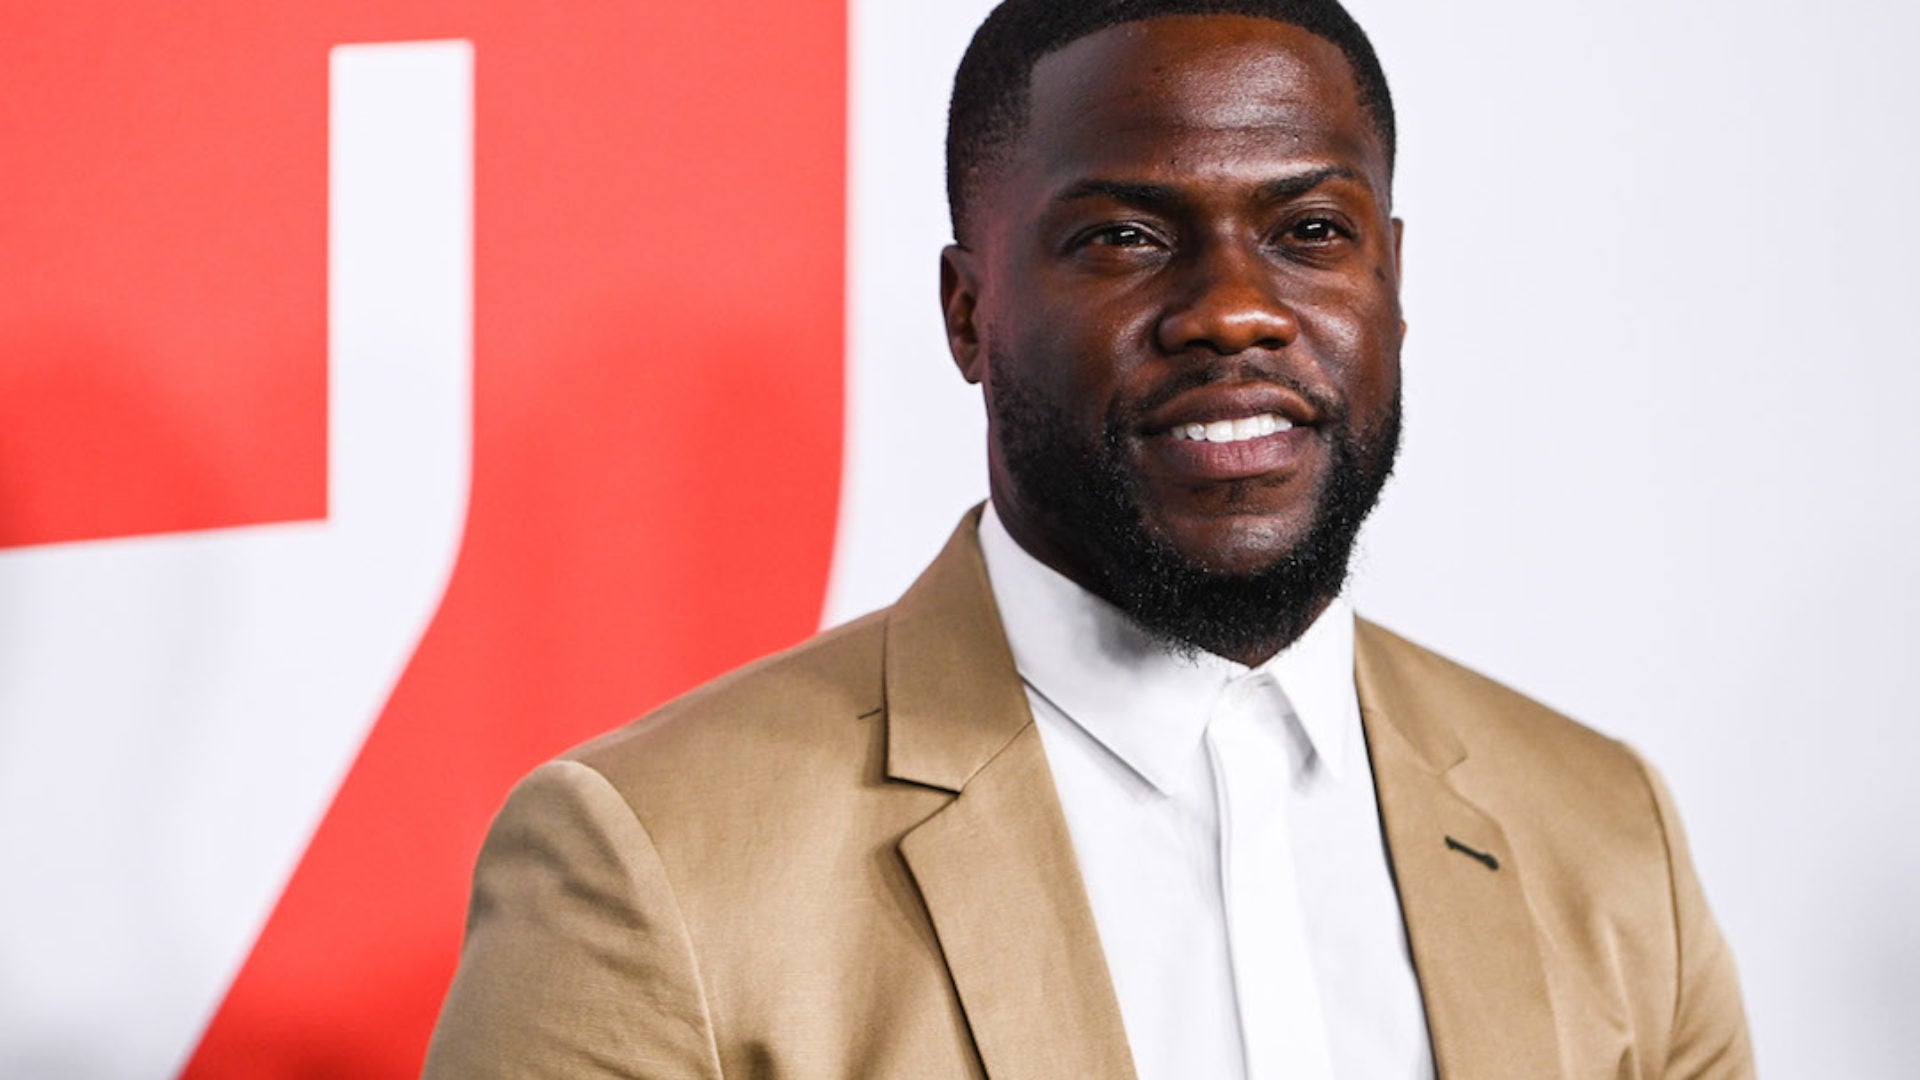 Kevin Hart Admits He ‘Was Immature’ About The Oscar Backlash Over Homophobic Jokes